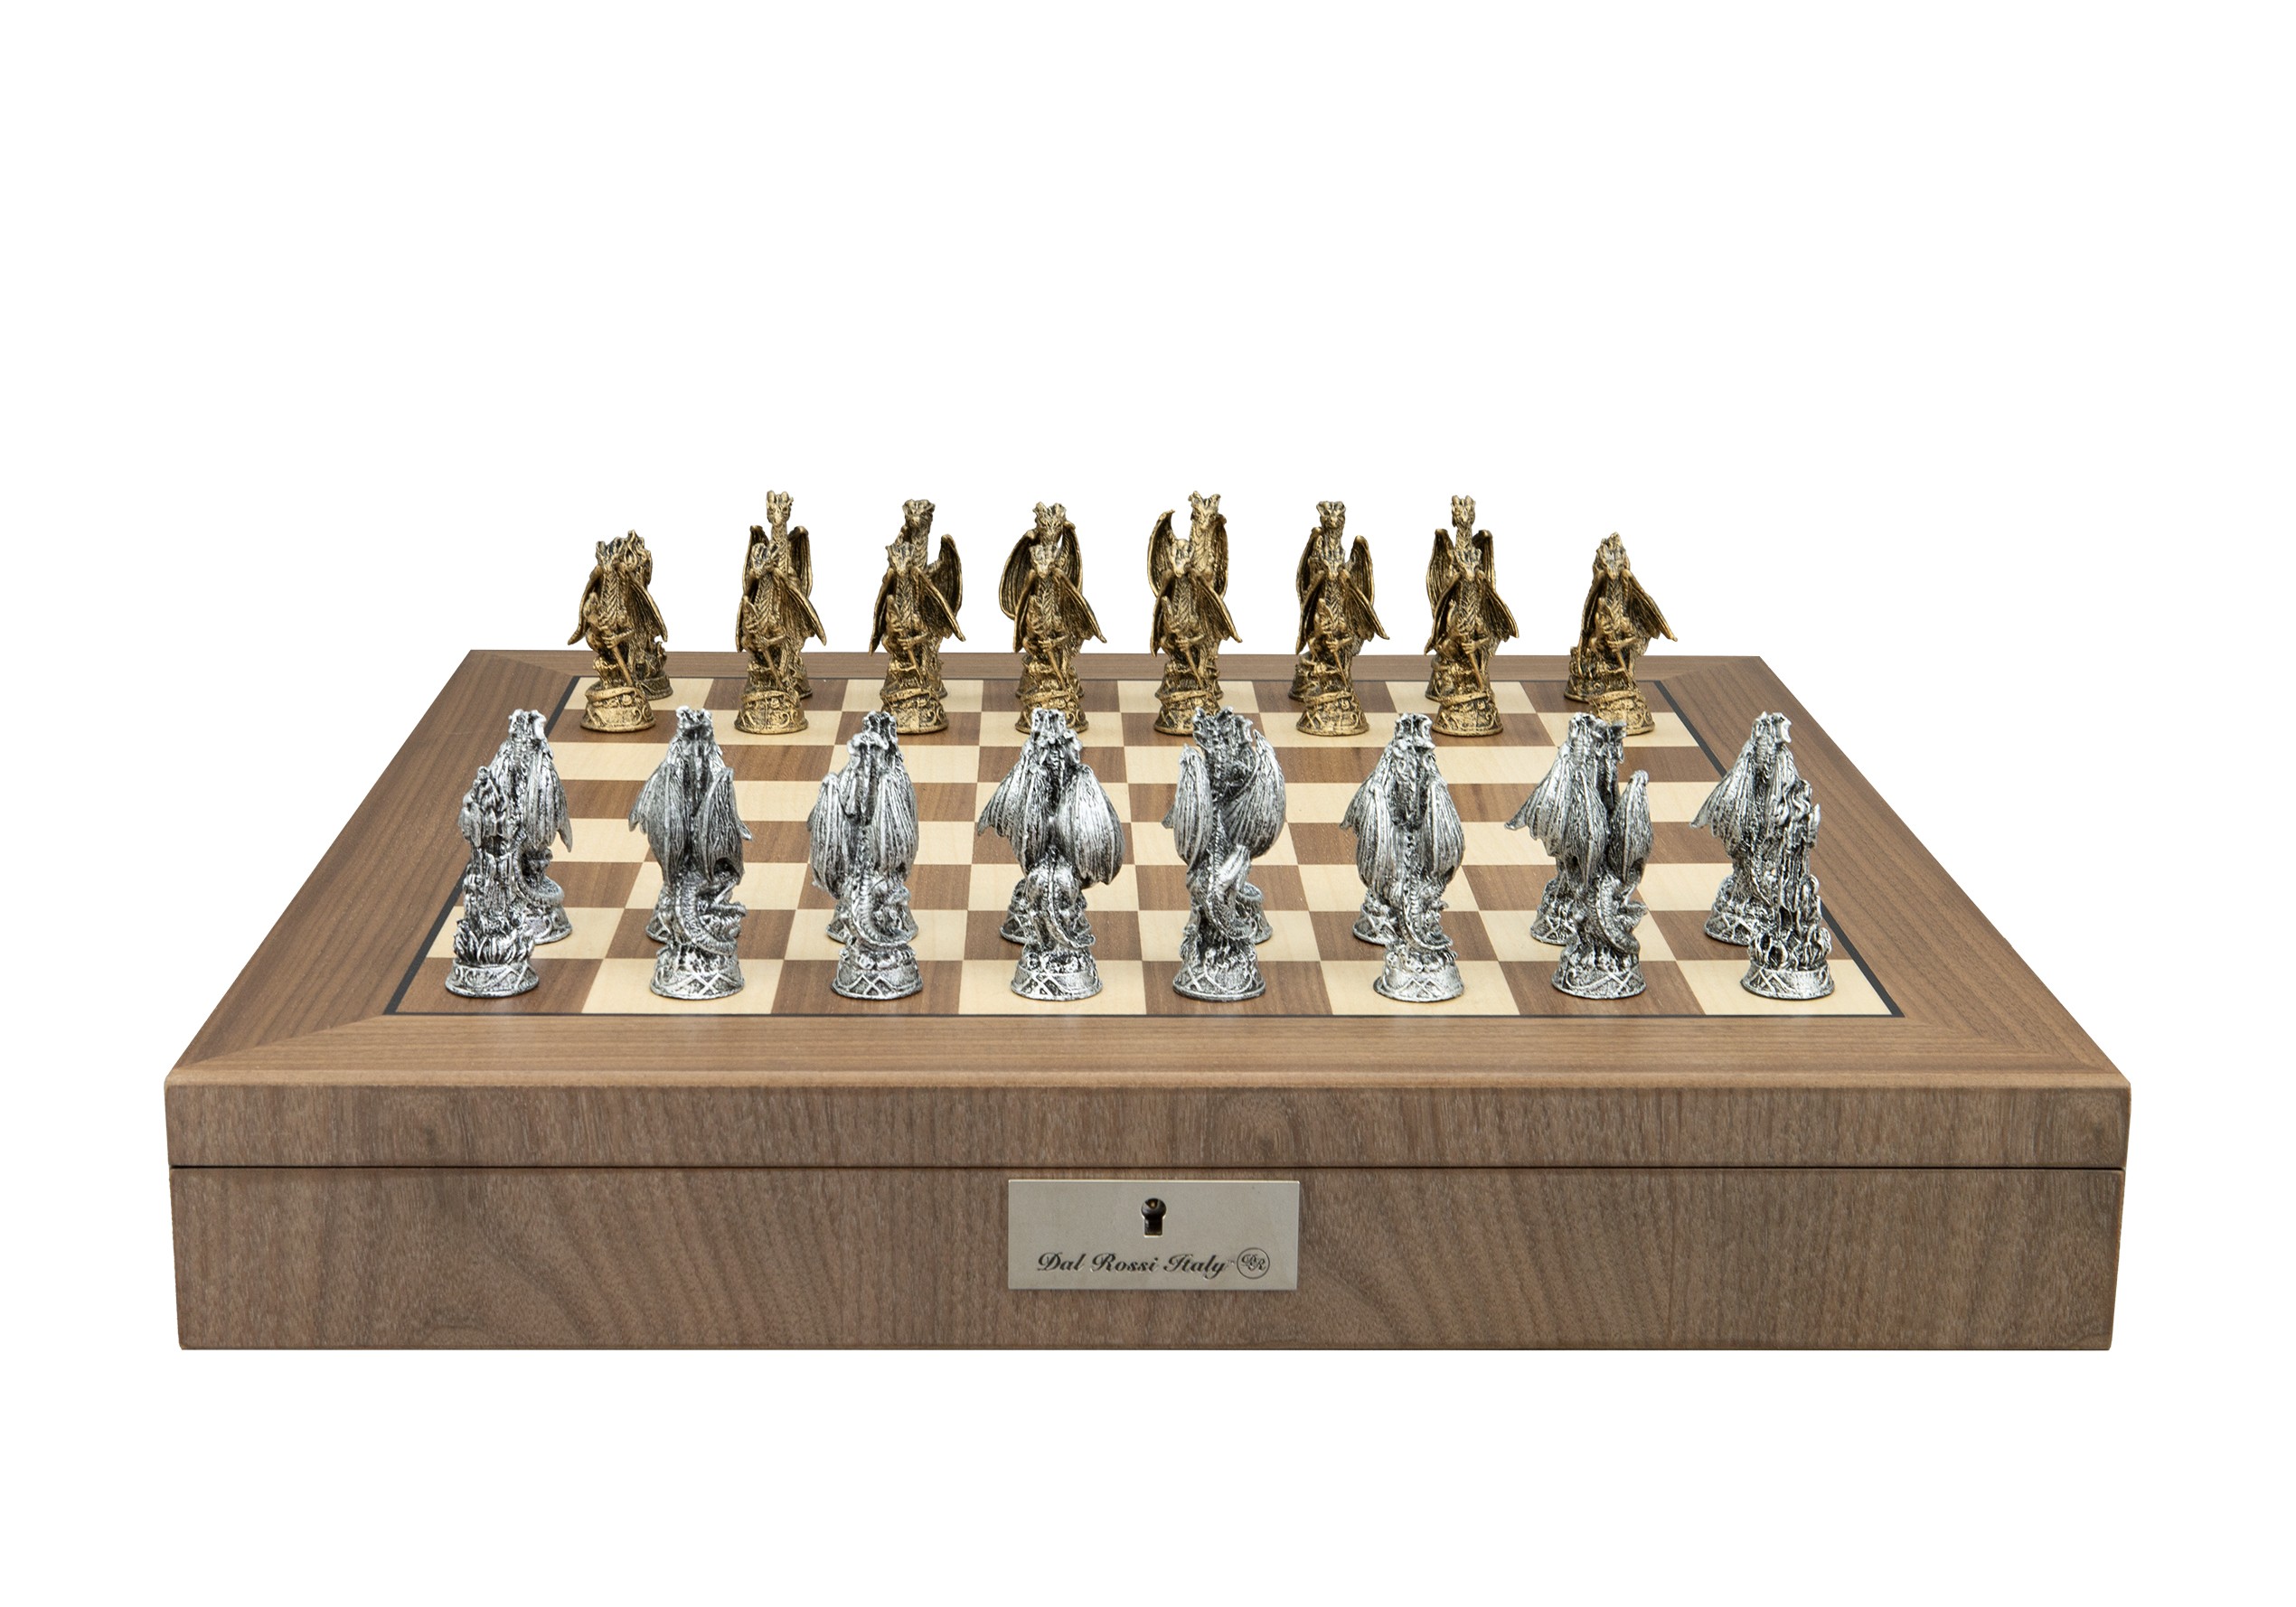 Dal Rossi Italy, Dragon, Pewter Chessmen on a Walnut Inlaid Chess Box with Compartments 20"